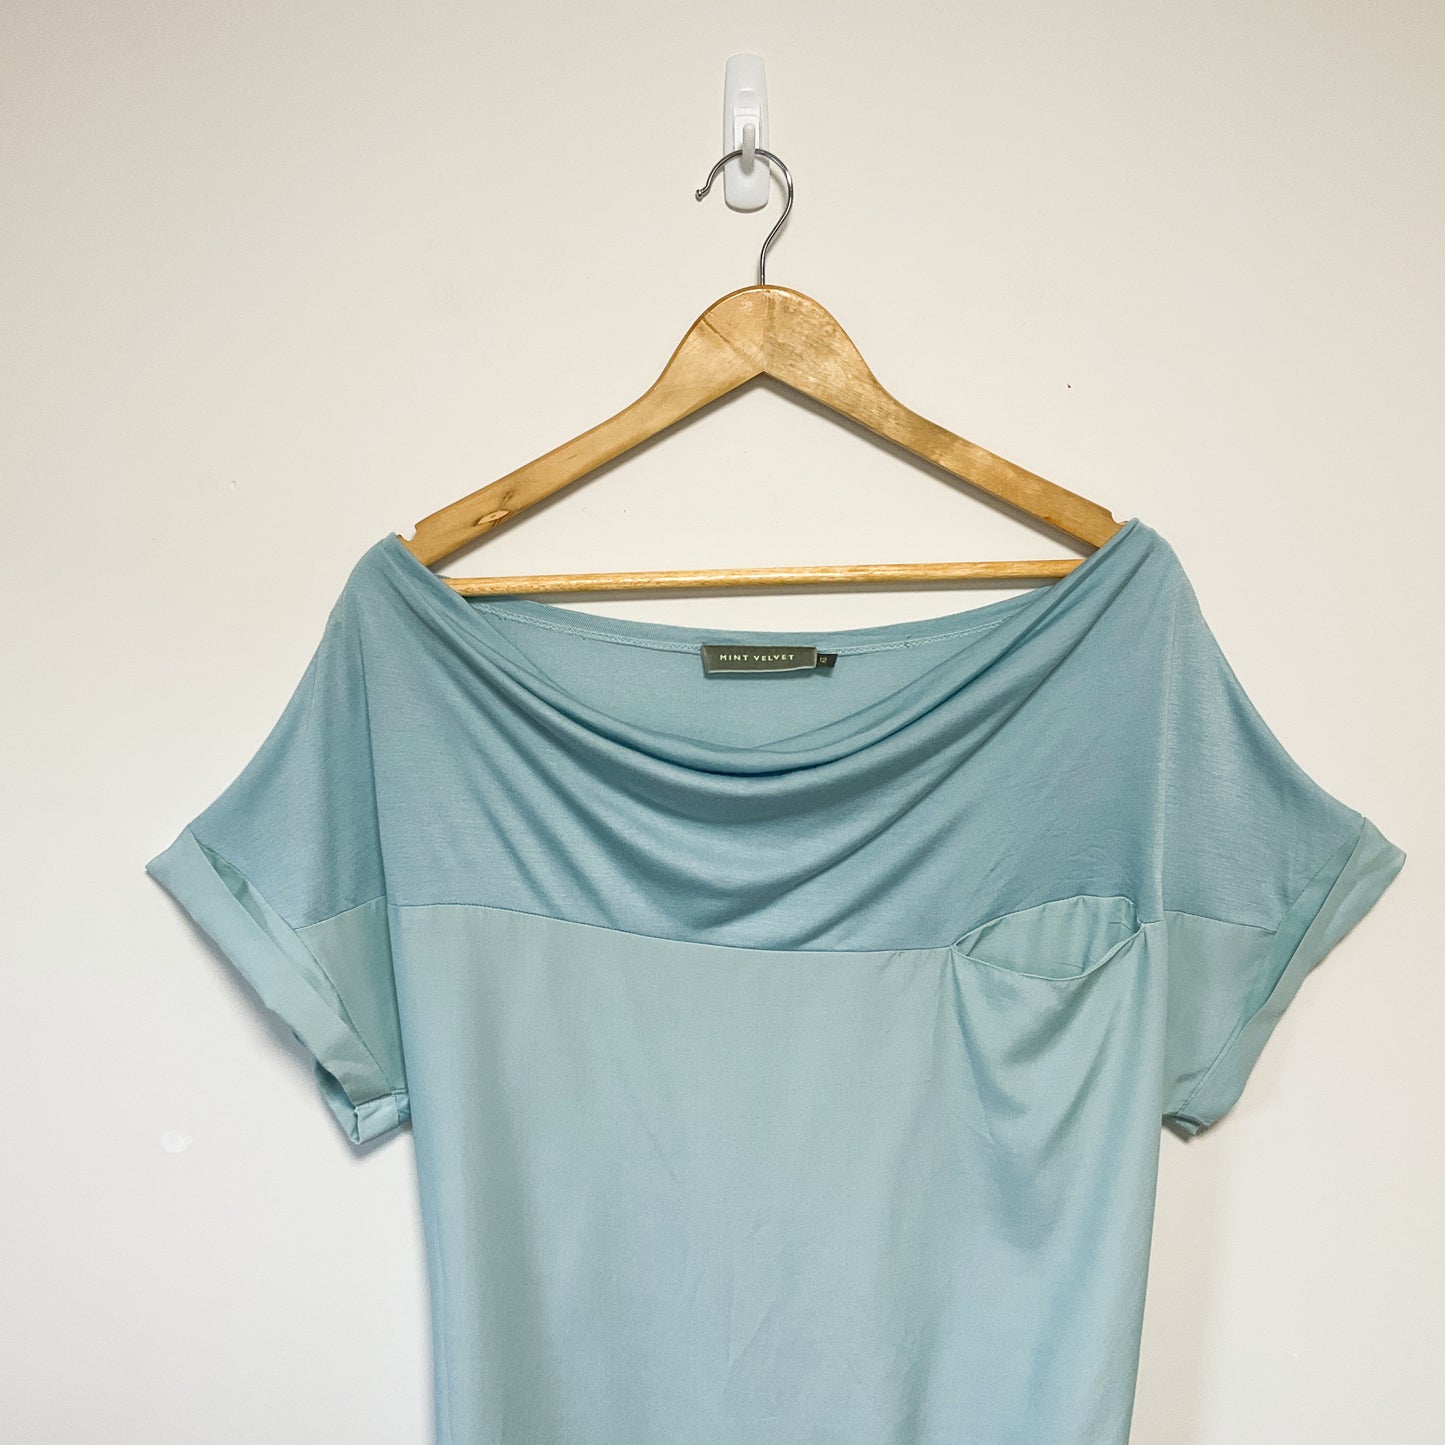 Mint Velvet - Short Sleeve Cowl Neck Casual Outfits Top